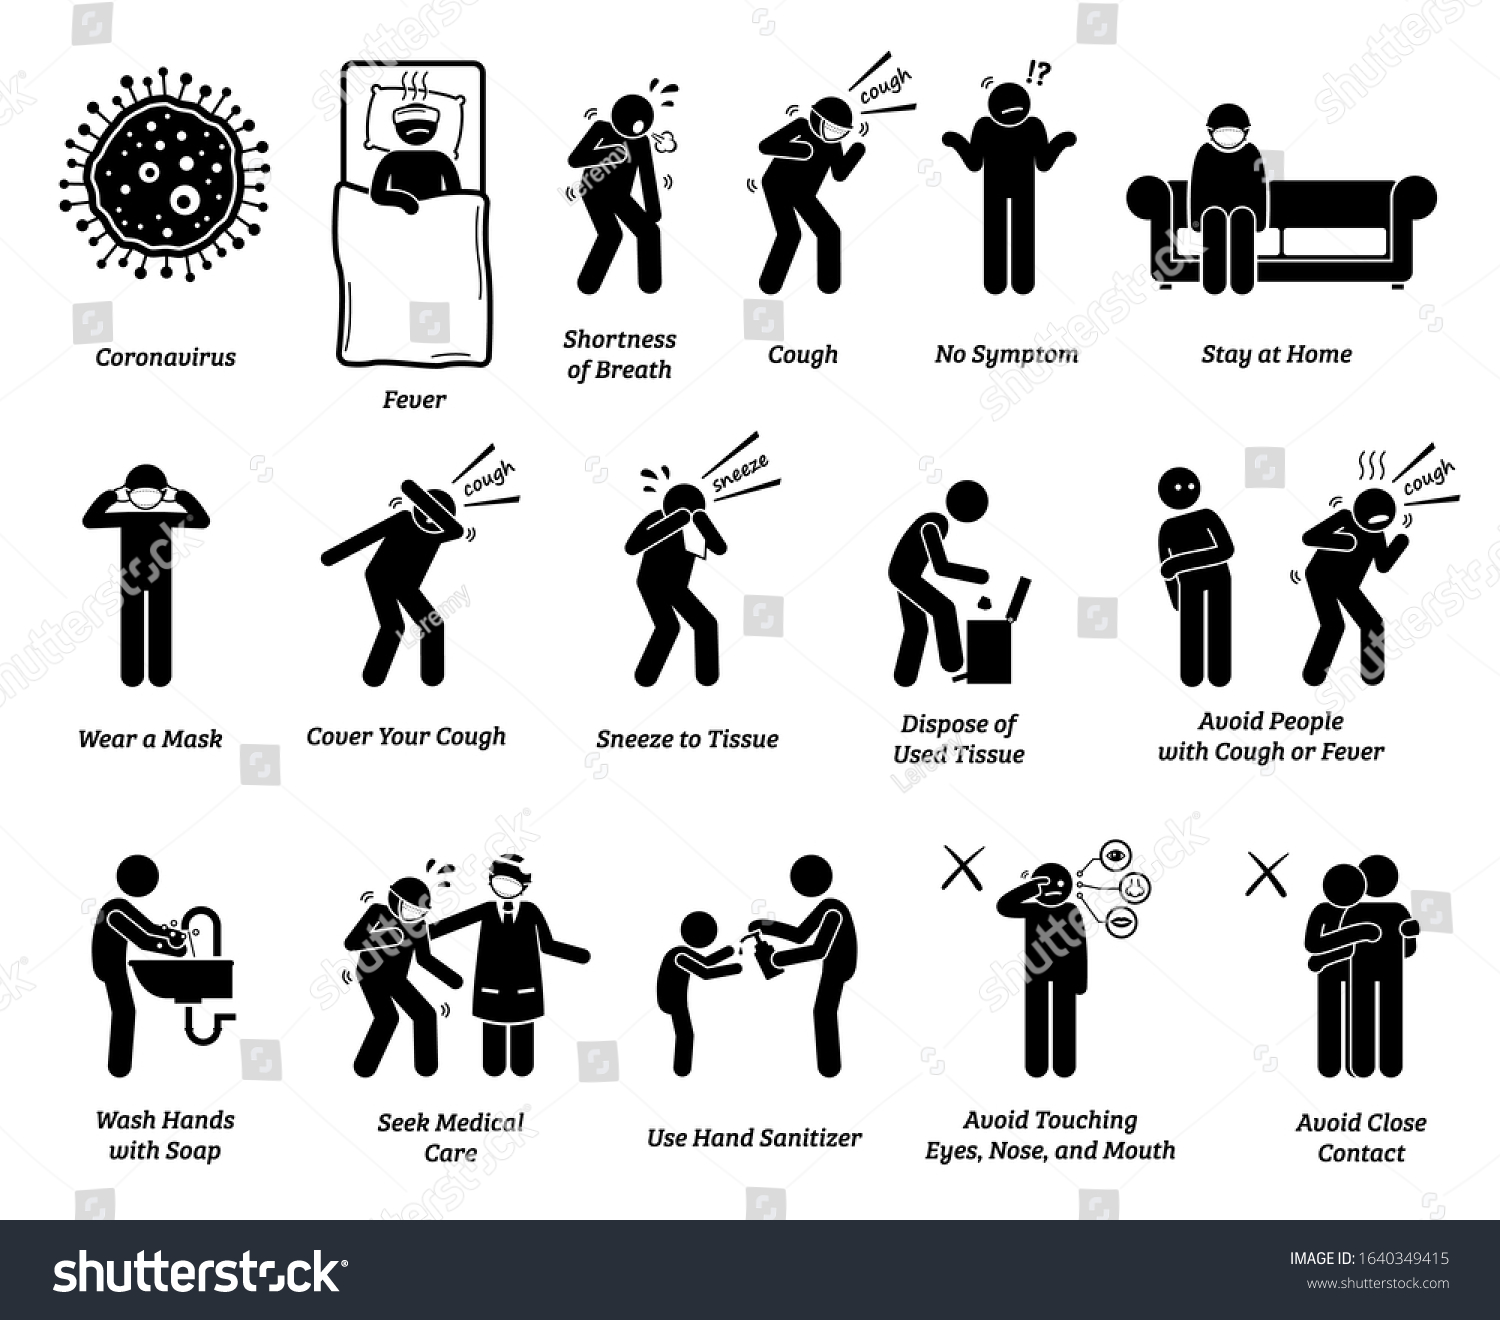 Sign symptoms of coronavirus Covid-19 prevention tips. Vector artwork of people infected with coronavirus, influenza, or flu. Precaution and prevention ways to stop the pandemic virus from spreading.  #1640349415